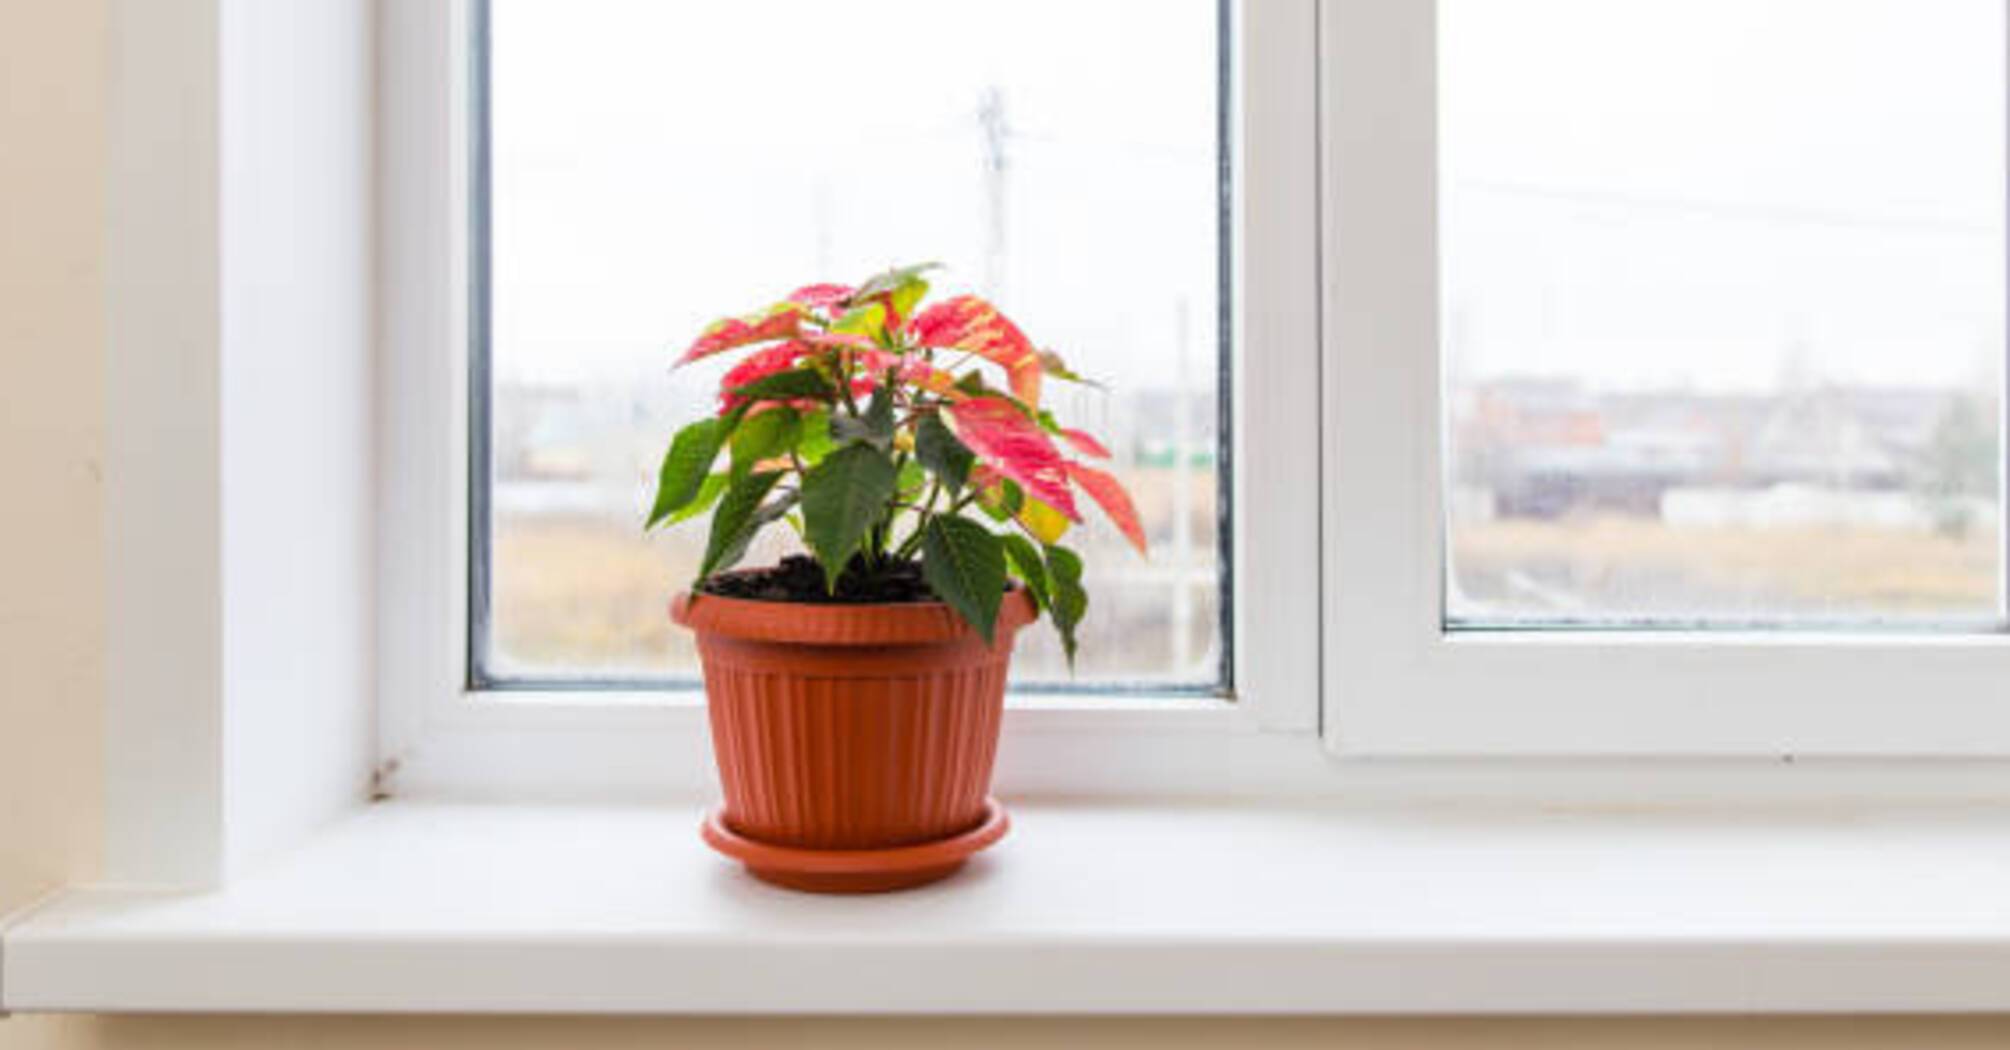 How to restore color to a white window sill: 3 effective life hacks